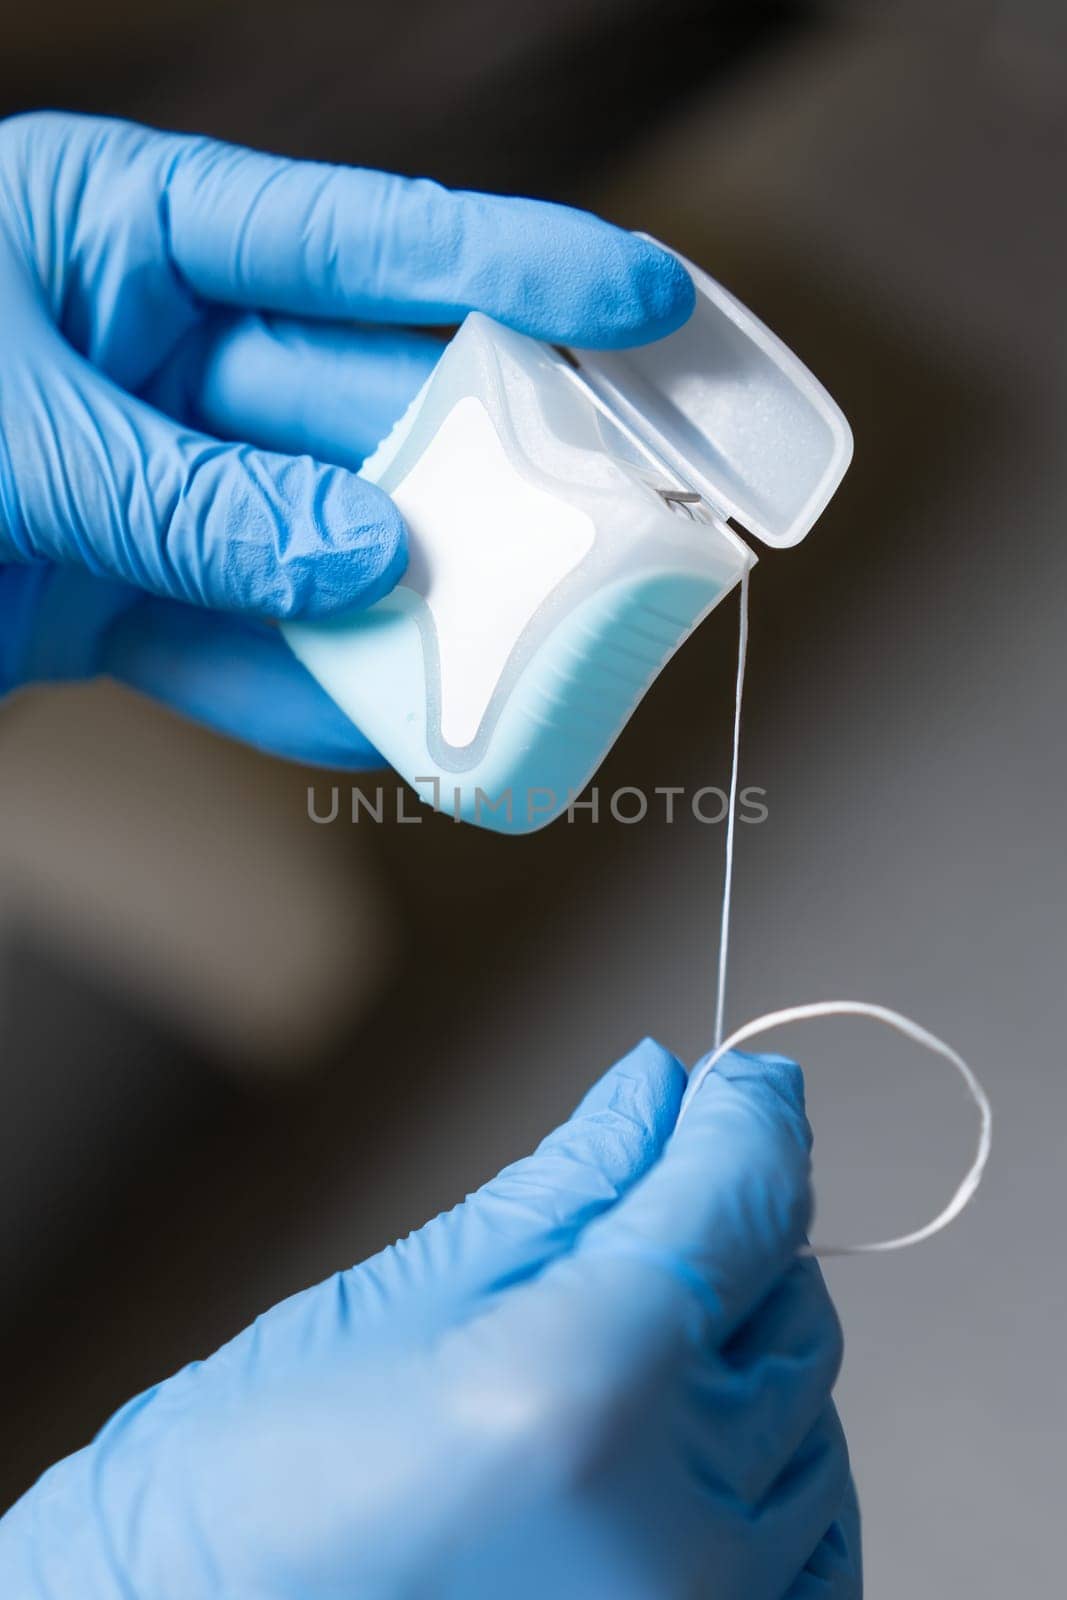 Dental floss in the hands of a dentist clad in latex gloves. by vladimka